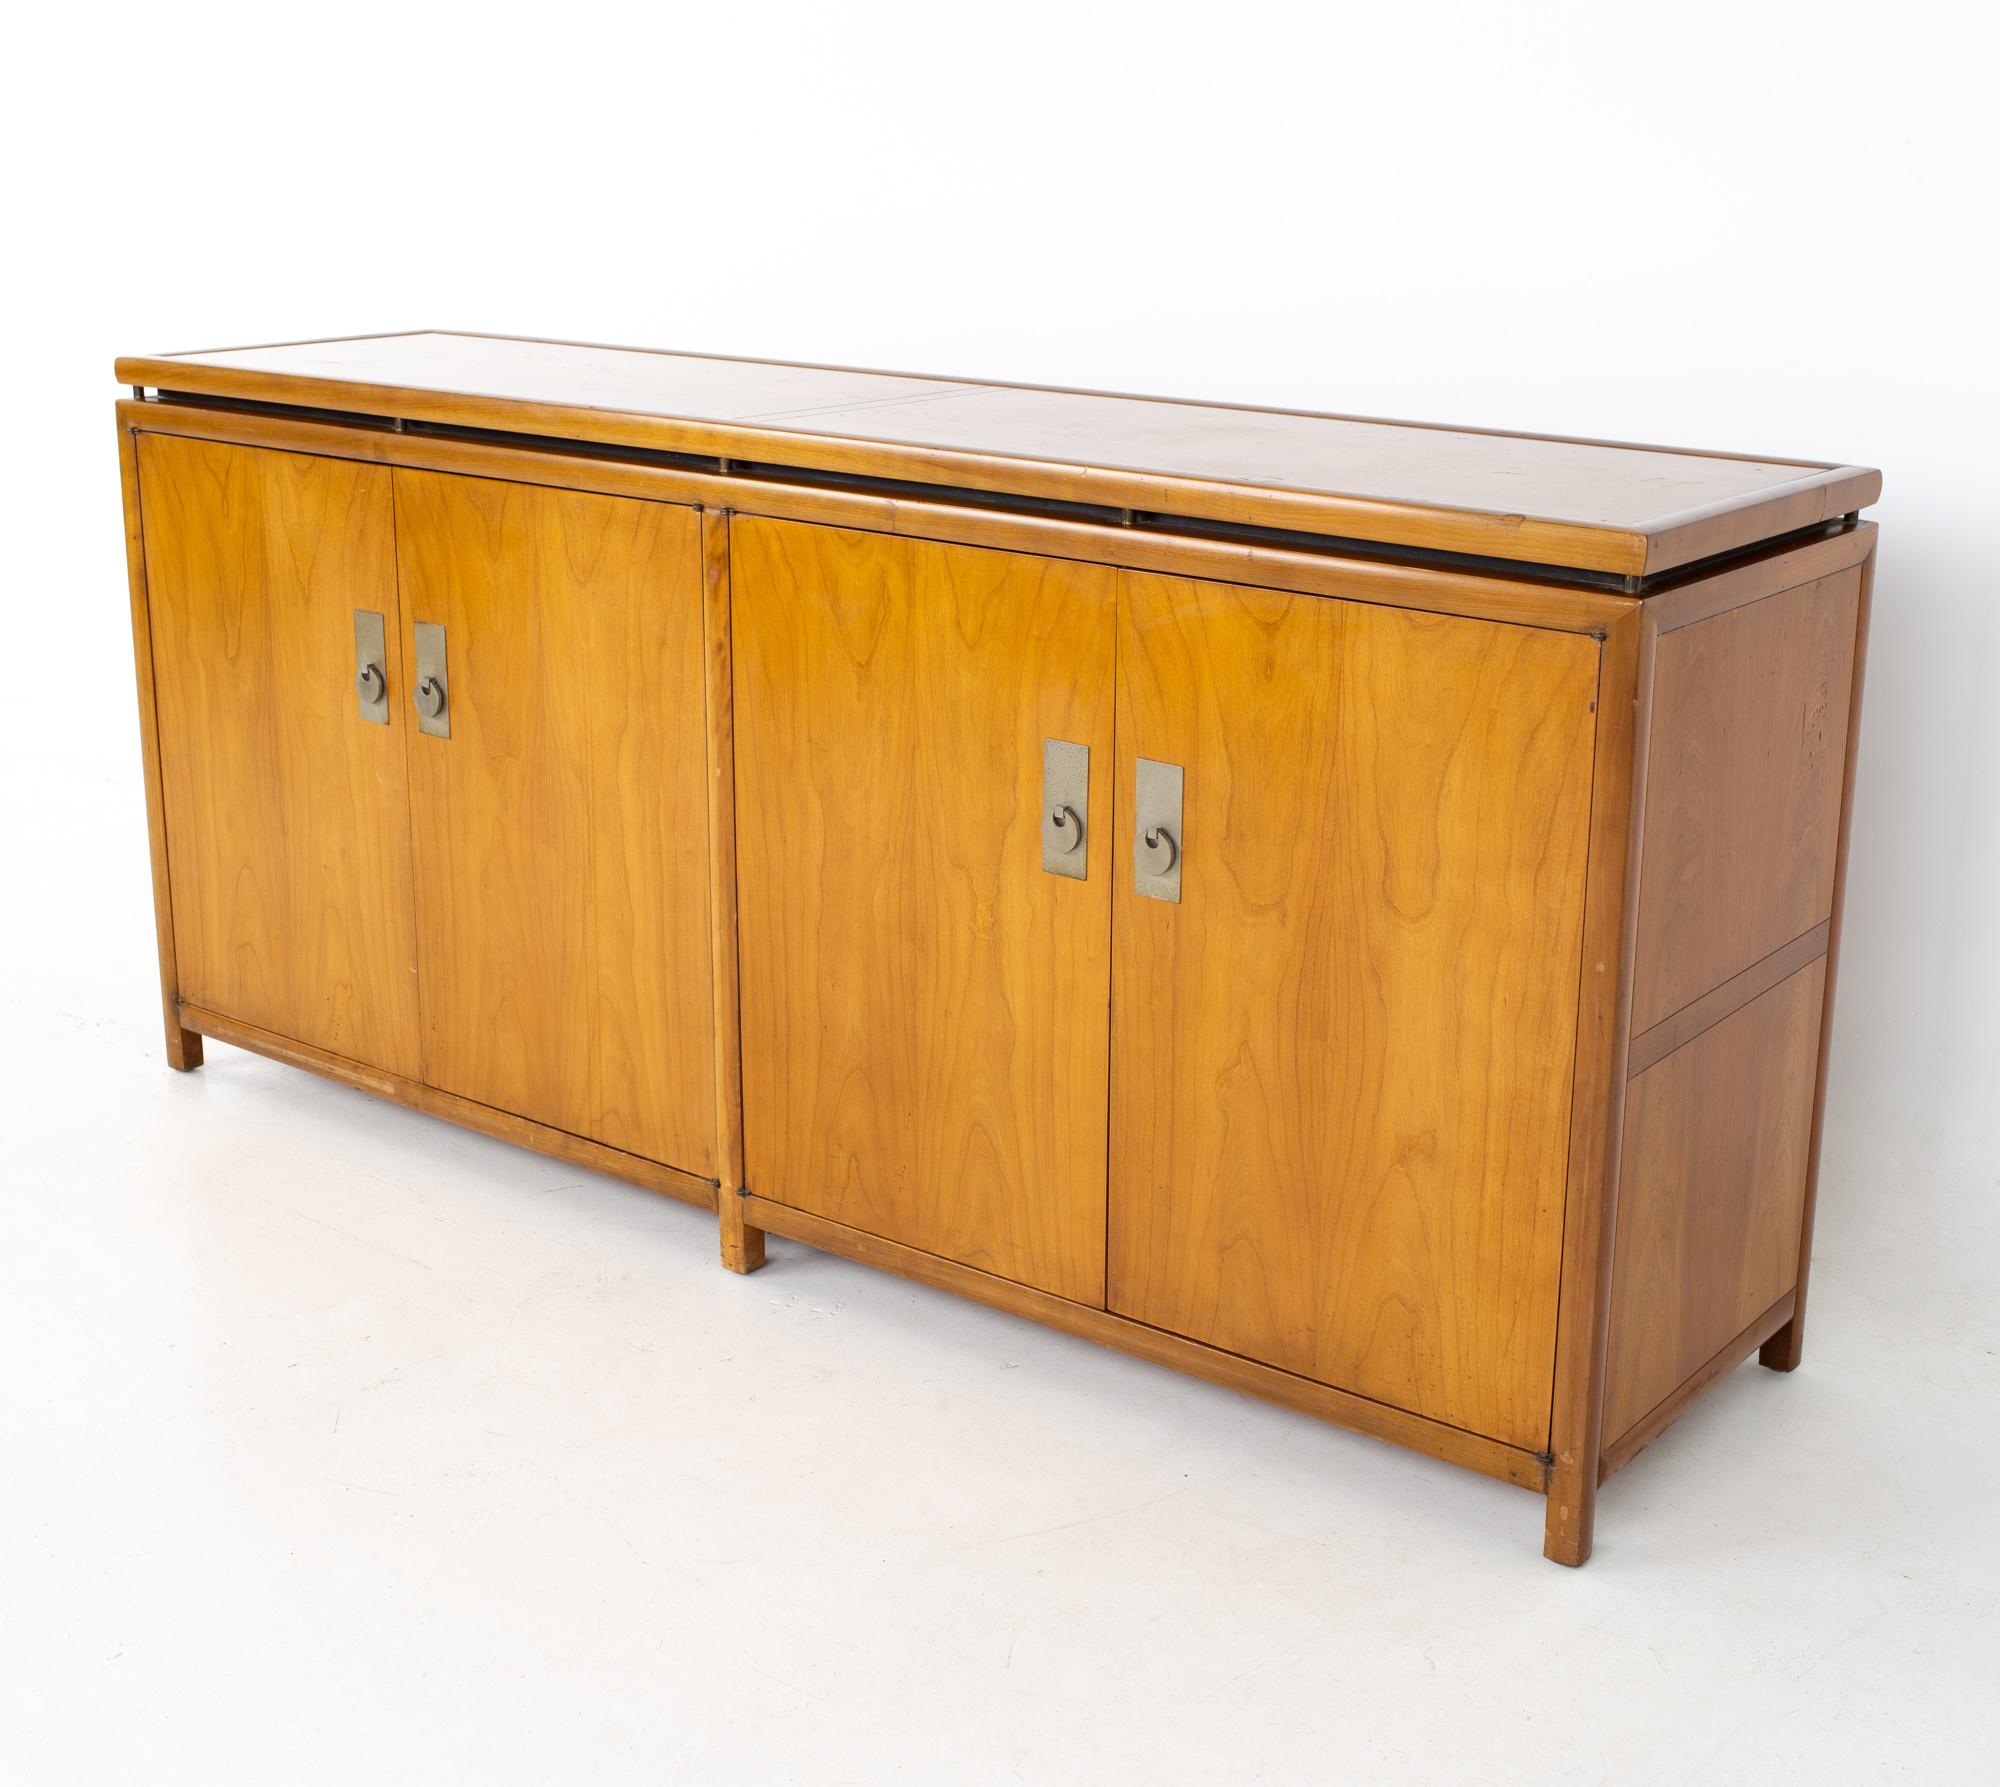 Michael Taylor for Baker New World Collection Mid Century sideboard buffet credenza
Credenza measures: 47.5 wide x 18.75 deep x 37 inches high

All pieces of furniture can be had in what we call restored vintage condition. That means the piece is